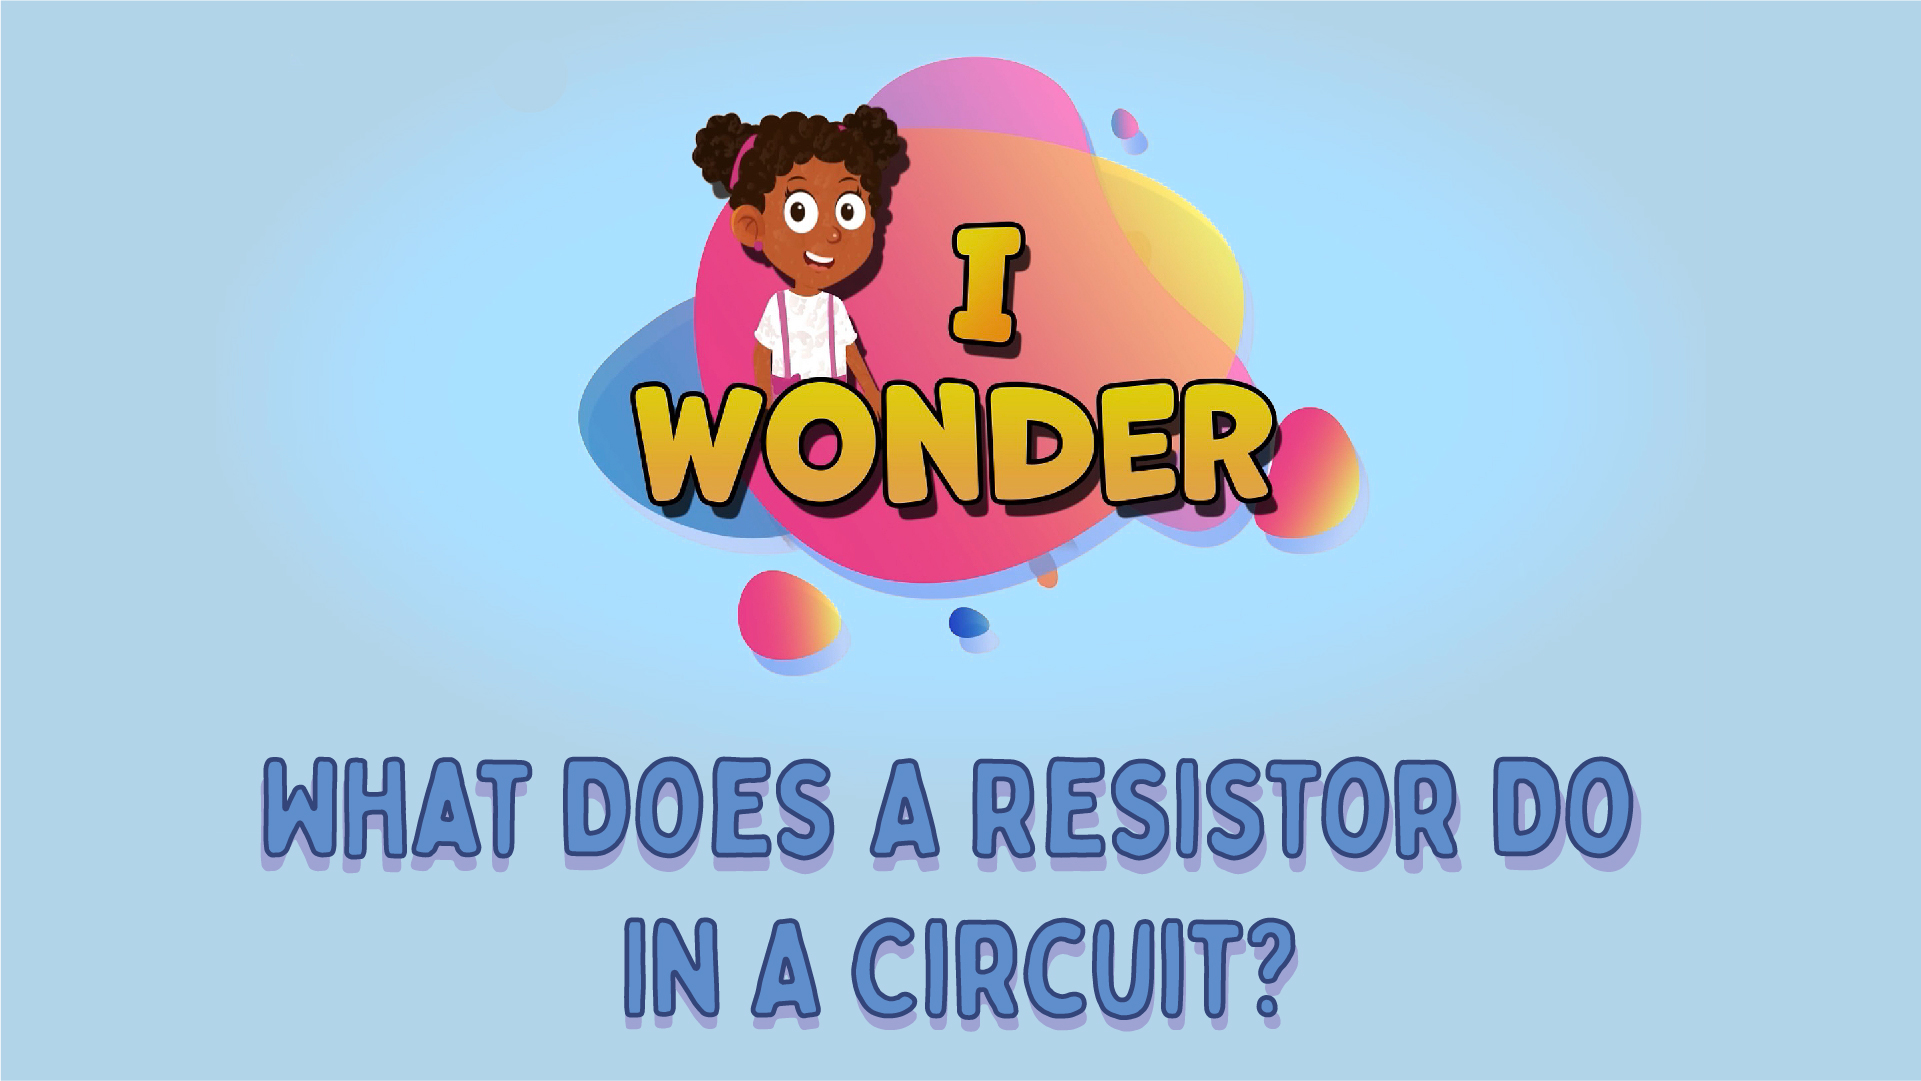 What Does A Resistor Do In A Circuit?